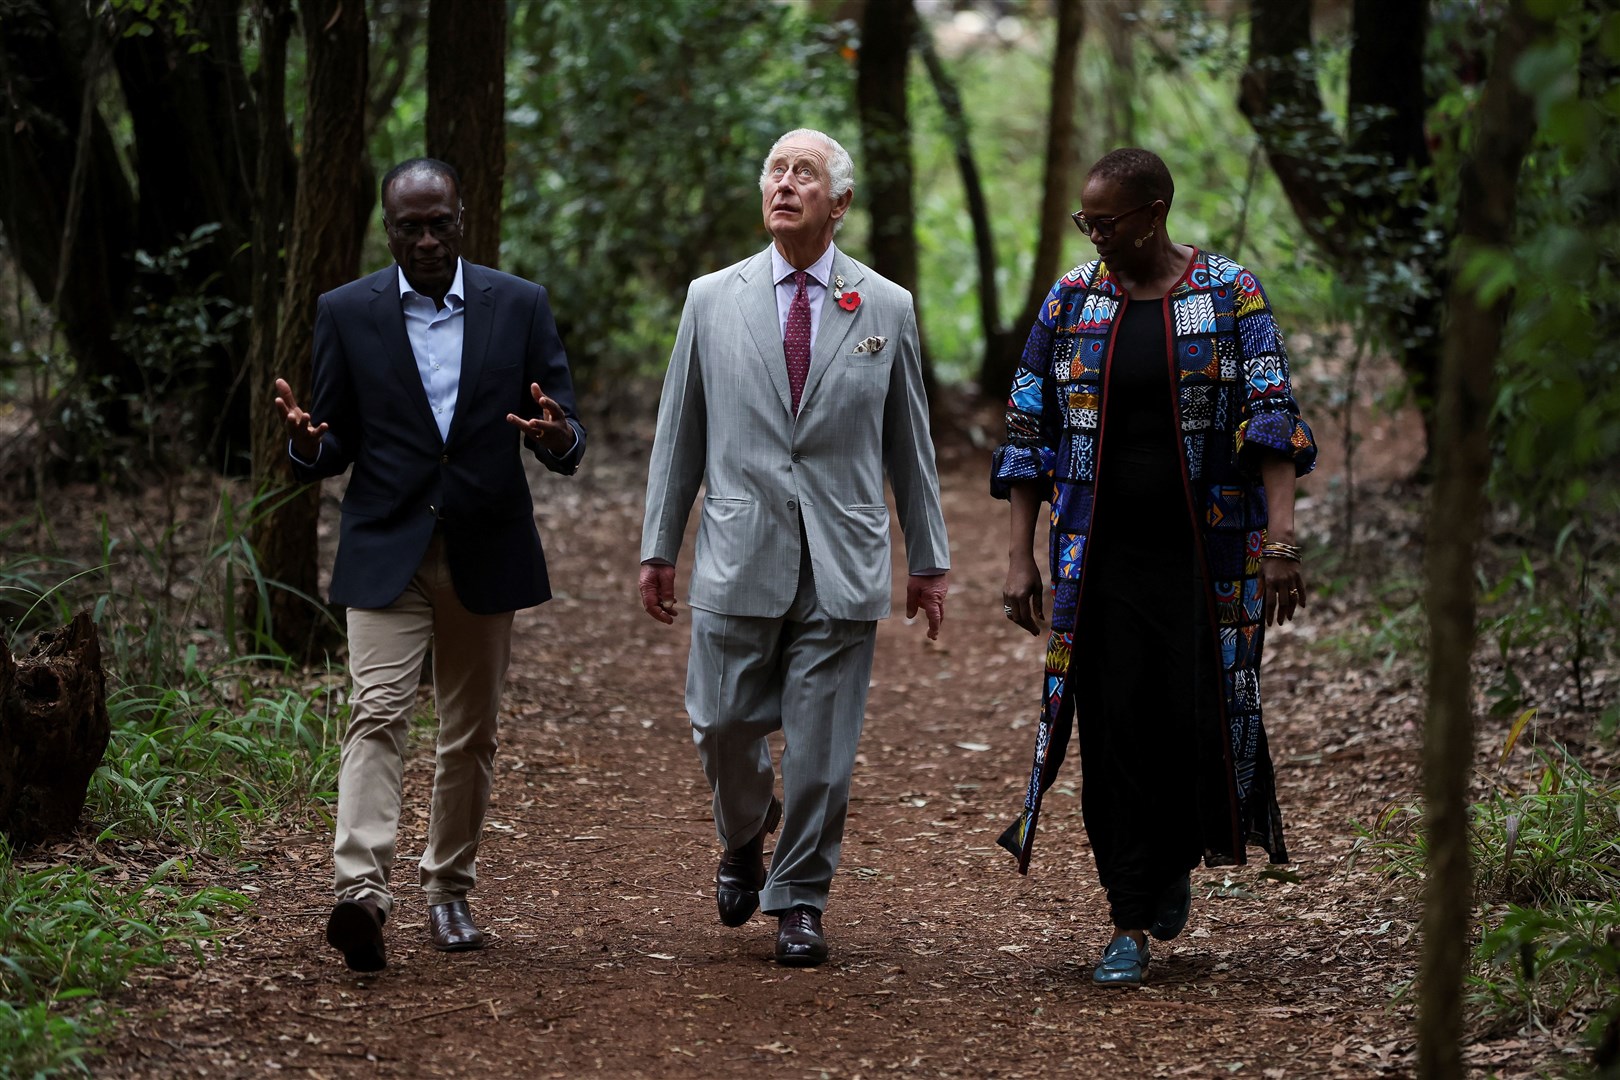 The King visited Nairobi’s Karura Forest to highlight the crucial role of green spaces in sustainable cities (Phil Noble/PA)